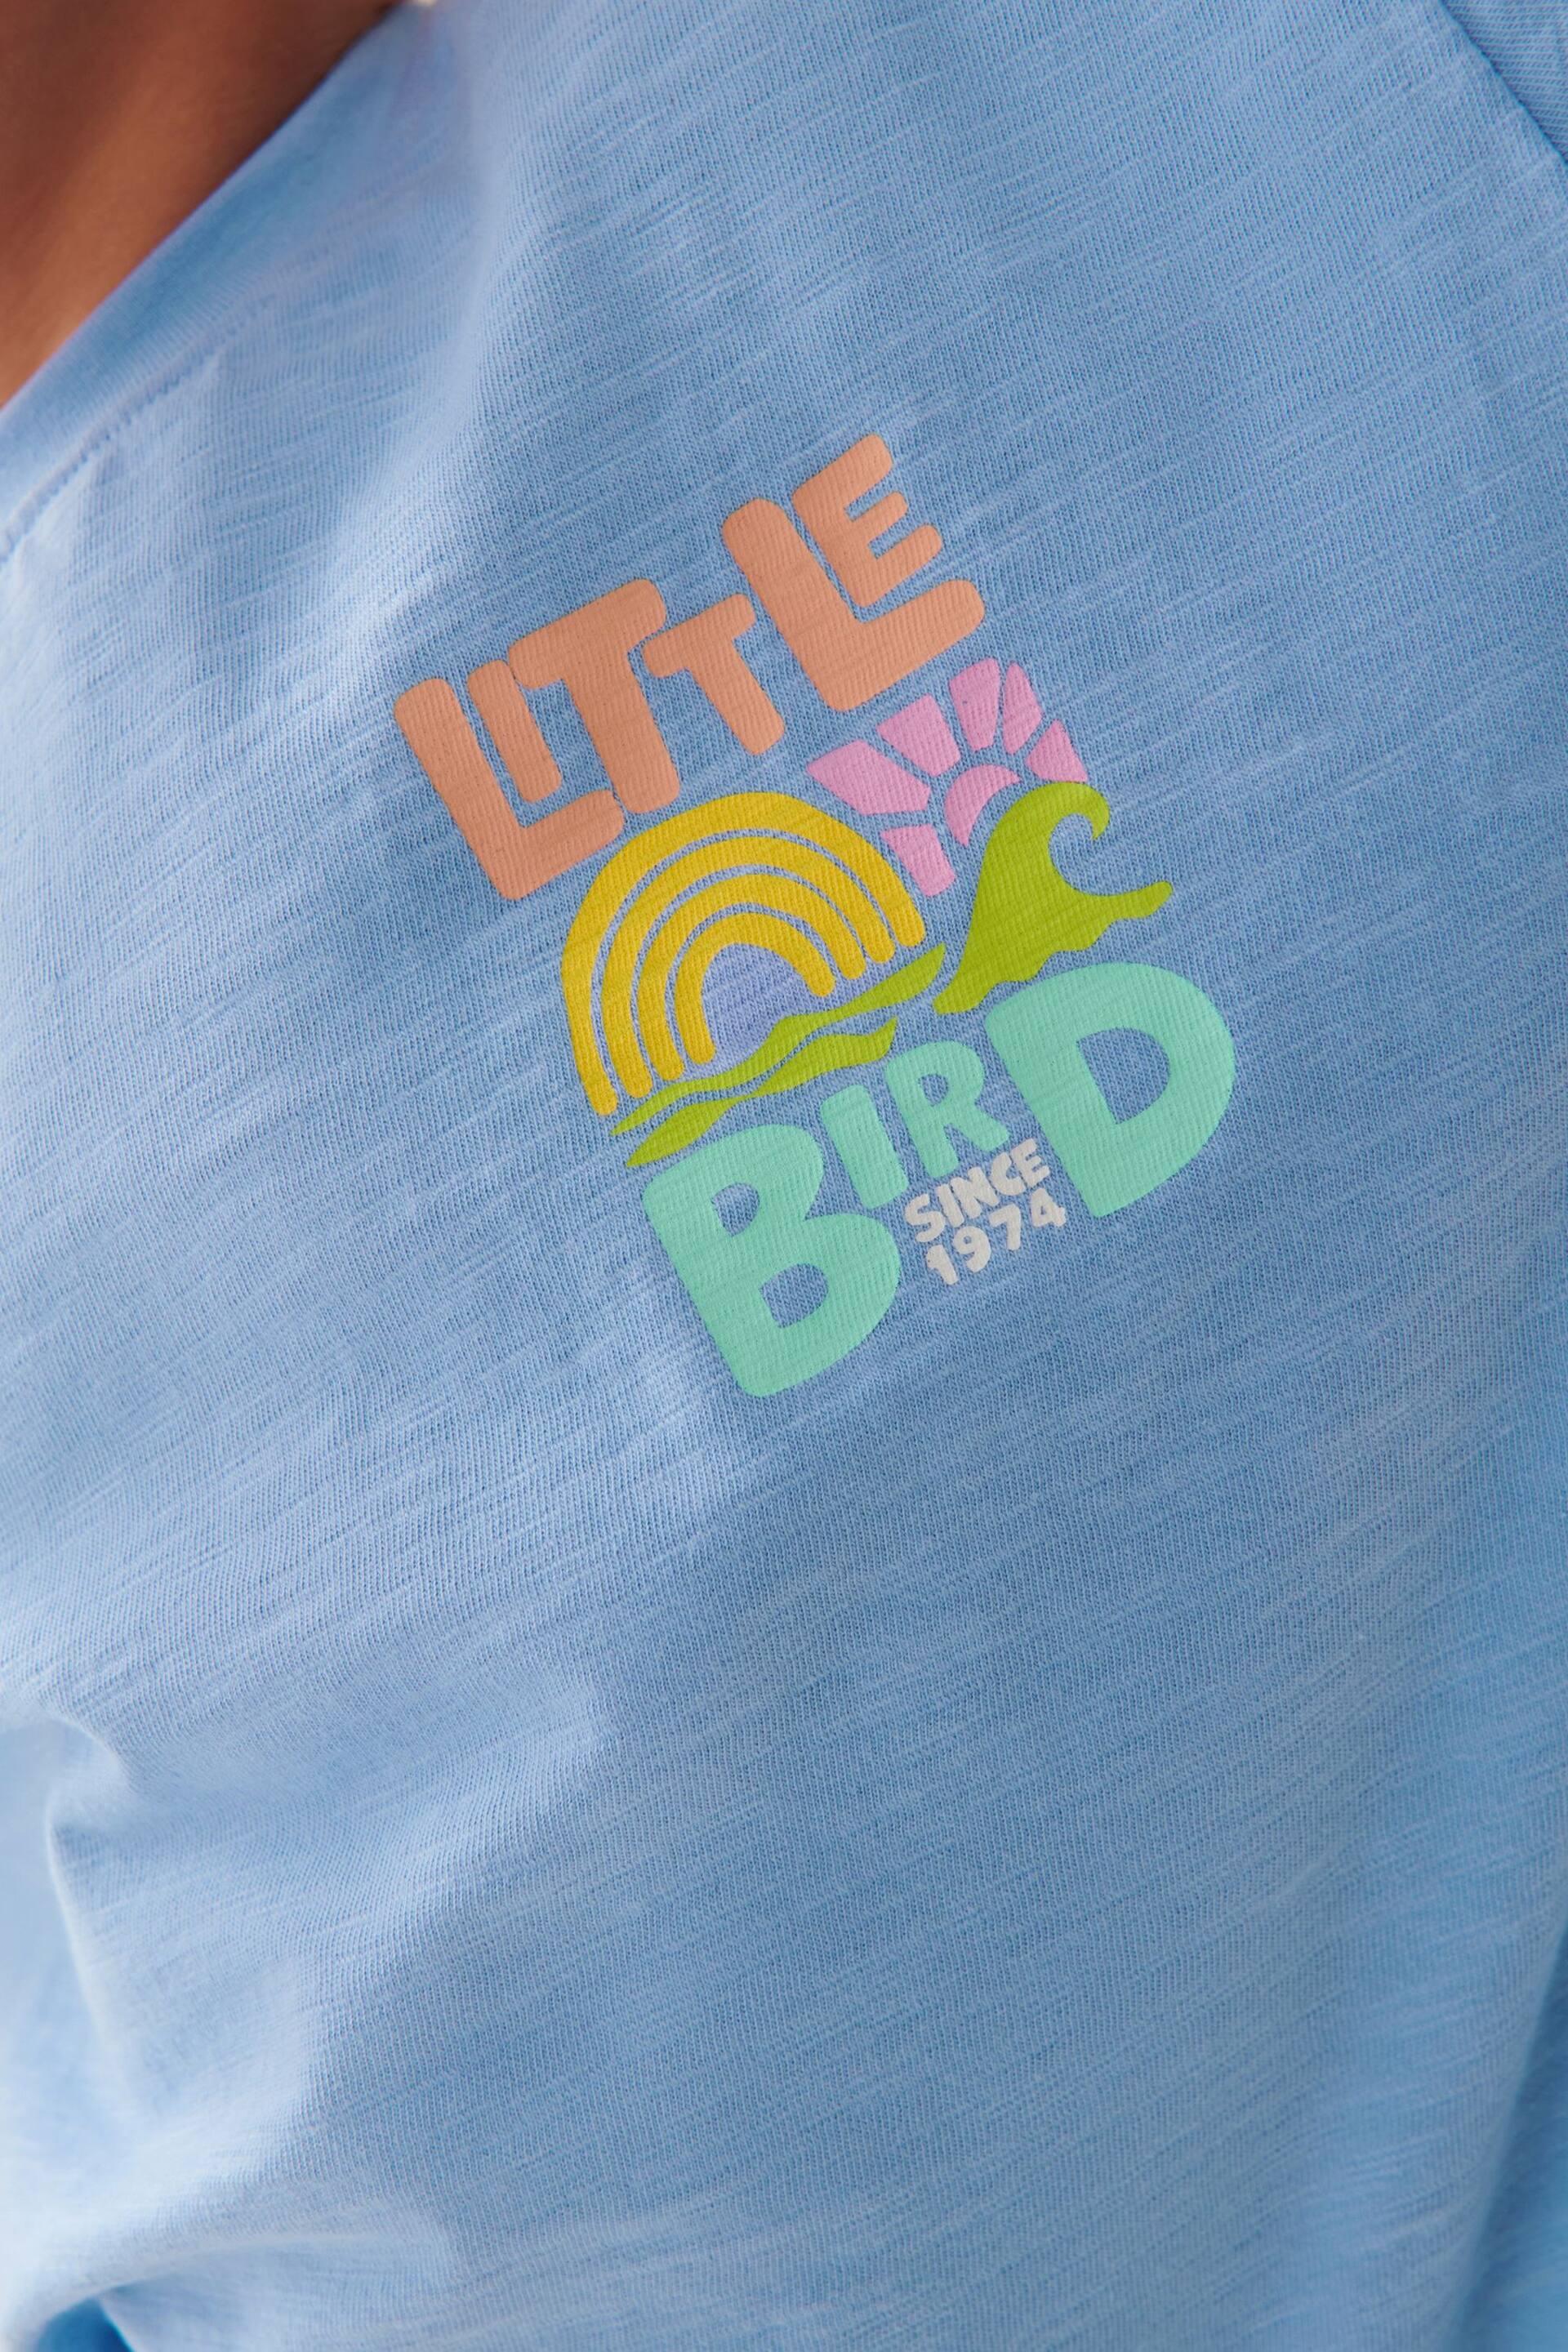 Little Bird by Jools Oliver Lilac Purple Short Sleeve Colourful Relaxed Fit T-Shirt - Image 2 of 3